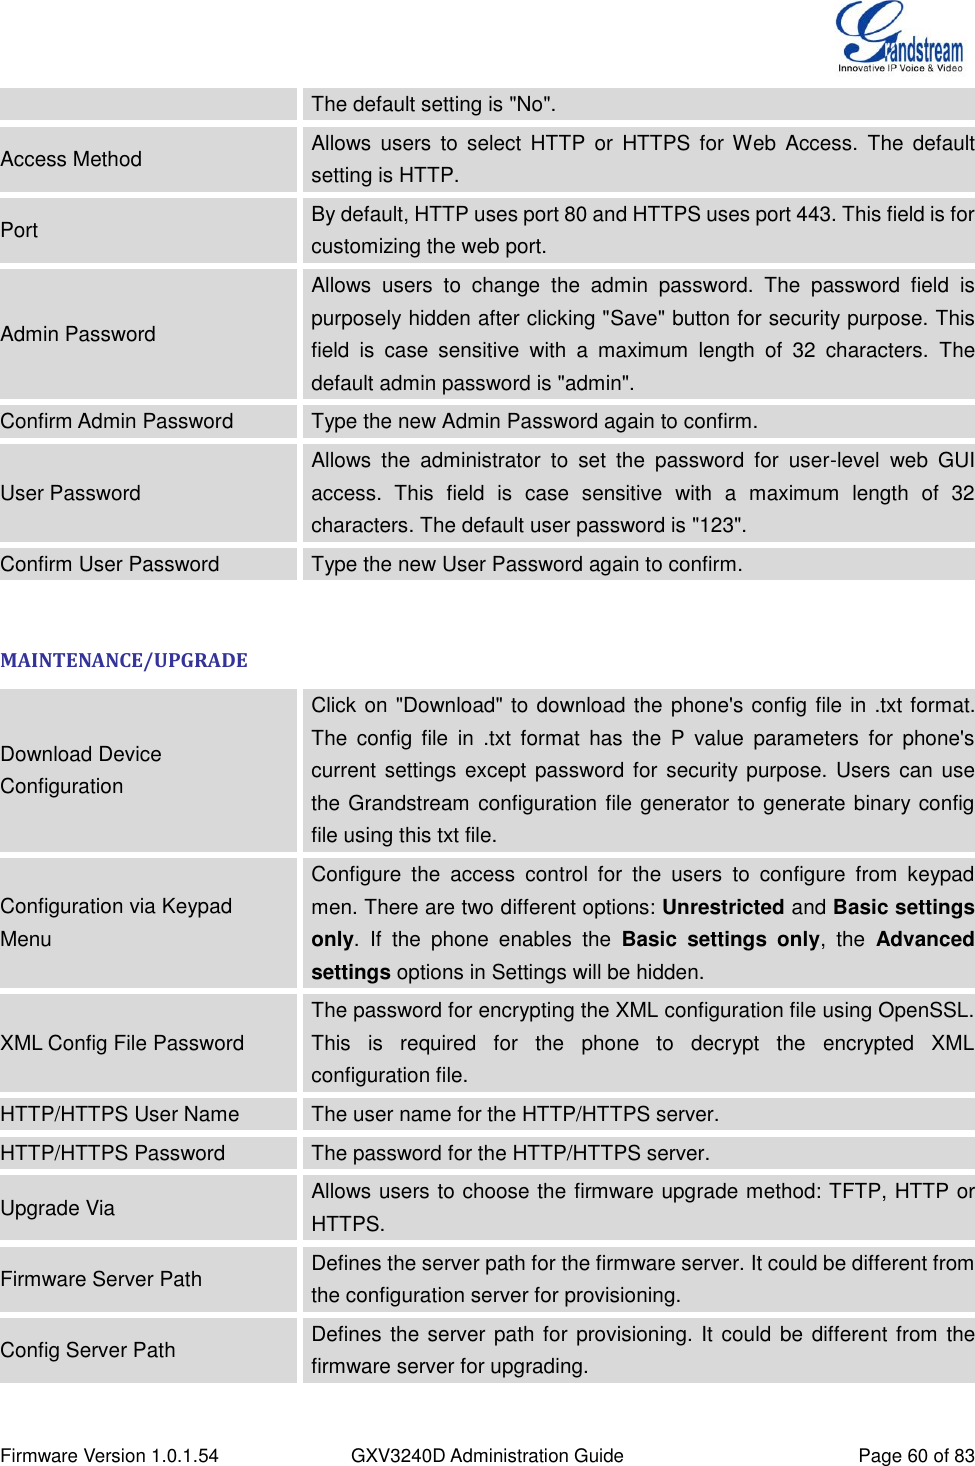  Firmware Version 1.0.1.54 GXV3240D Administration Guide Page 60 of 83  The default setting is &quot;No&quot;. Access Method Allows  users  to  select  HTTP  or  HTTPS  for Web  Access.  The  default setting is HTTP. Port By default, HTTP uses port 80 and HTTPS uses port 443. This field is for customizing the web port. Admin Password Allows  users  to  change  the  admin  password.  The  password  field  is purposely hidden after clicking &quot;Save&quot; button for security purpose. This field  is  case  sensitive  with  a  maximum  length  of  32  characters.  The default admin password is &quot;admin&quot;. Confirm Admin Password Type the new Admin Password again to confirm. User Password Allows  the  administrator  to  set  the  password  for  user-level  web  GUI access.  This  field  is  case  sensitive  with  a  maximum  length  of  32 characters. The default user password is &quot;123&quot;. Confirm User Password Type the new User Password again to confirm.  MAINTENANCE/UPGRADE Download Device Configuration Click on &quot;Download&quot; to download the phone&apos;s config file in .txt format. The  config  file  in  .txt  format  has  the  P  value  parameters  for  phone&apos;s current settings except password for security purpose. Users can use the Grandstream configuration file generator to generate binary config file using this txt file. Configuration via Keypad Menu Configure  the  access  control  for  the  users  to  configure  from  keypad men. There are two different options: Unrestricted and Basic settings only.  If  the  phone  enables  the  Basic  settings  only,  the  Advanced settings options in Settings will be hidden. XML Config File Password The password for encrypting the XML configuration file using OpenSSL. This  is  required  for  the  phone  to  decrypt  the  encrypted  XML configuration file. HTTP/HTTPS User Name The user name for the HTTP/HTTPS server. HTTP/HTTPS Password The password for the HTTP/HTTPS server. Upgrade Via Allows users to choose the firmware upgrade method: TFTP, HTTP or HTTPS. Firmware Server Path Defines the server path for the firmware server. It could be different from the configuration server for provisioning. Config Server Path Defines the server path for provisioning. It could be different from the firmware server for upgrading. 